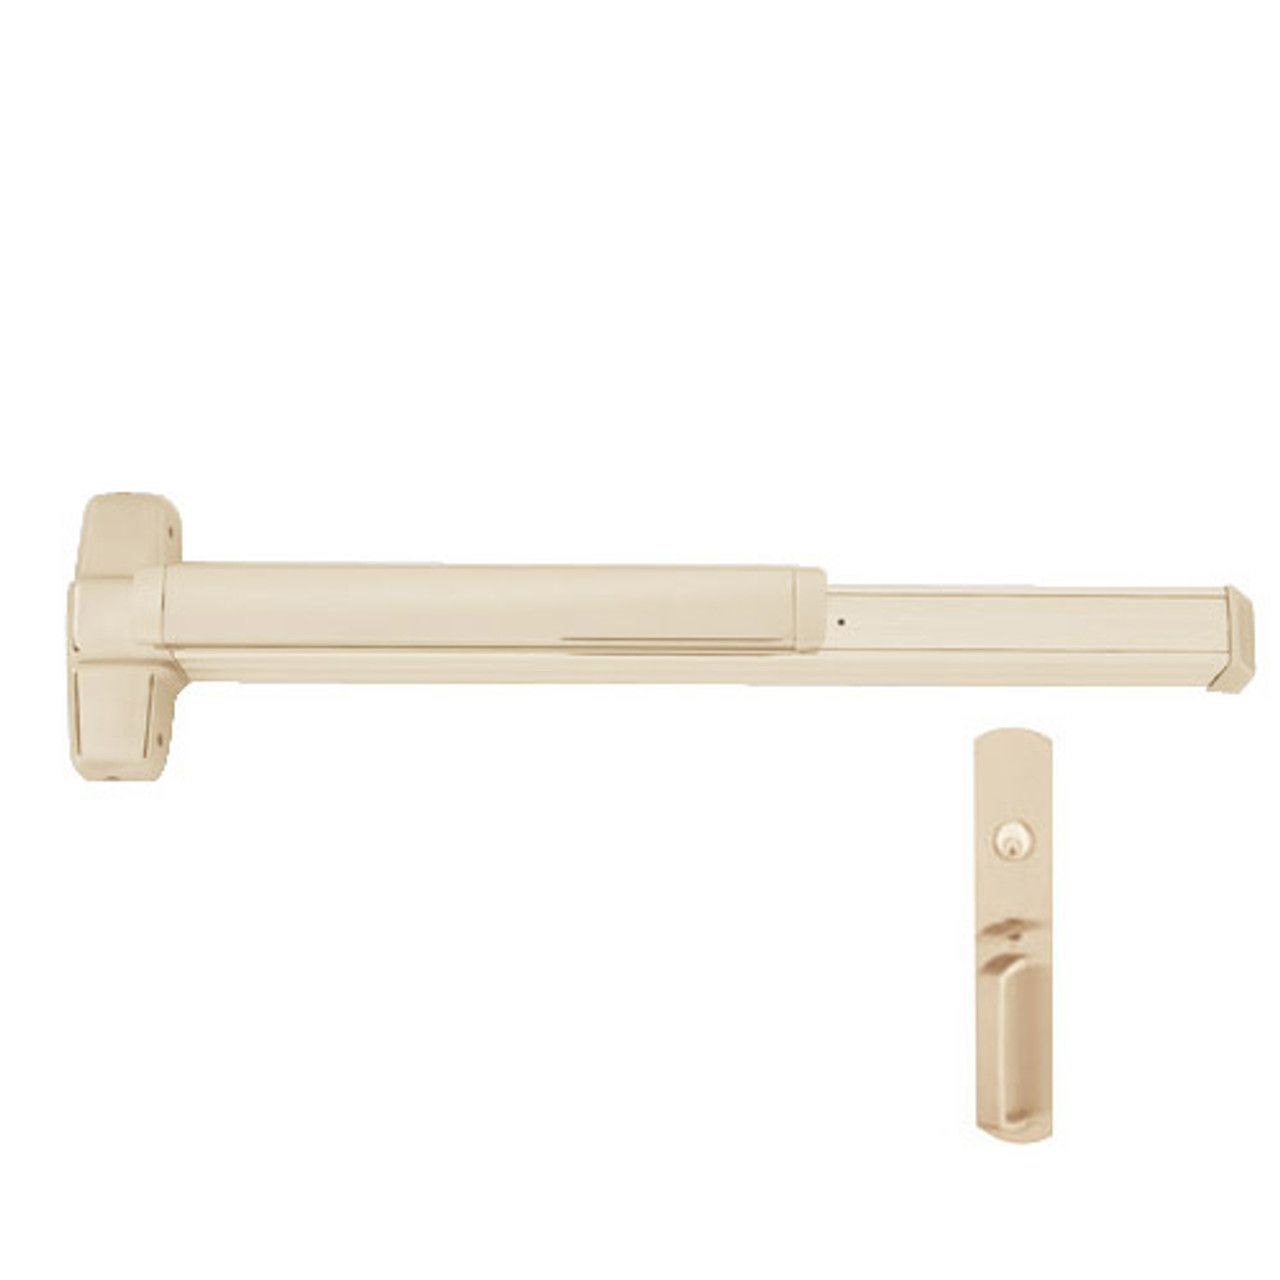 EL9847WDC-TP-US4-3 Von Duprin Exit Device with Electric Latch Retraction in Satin Brass